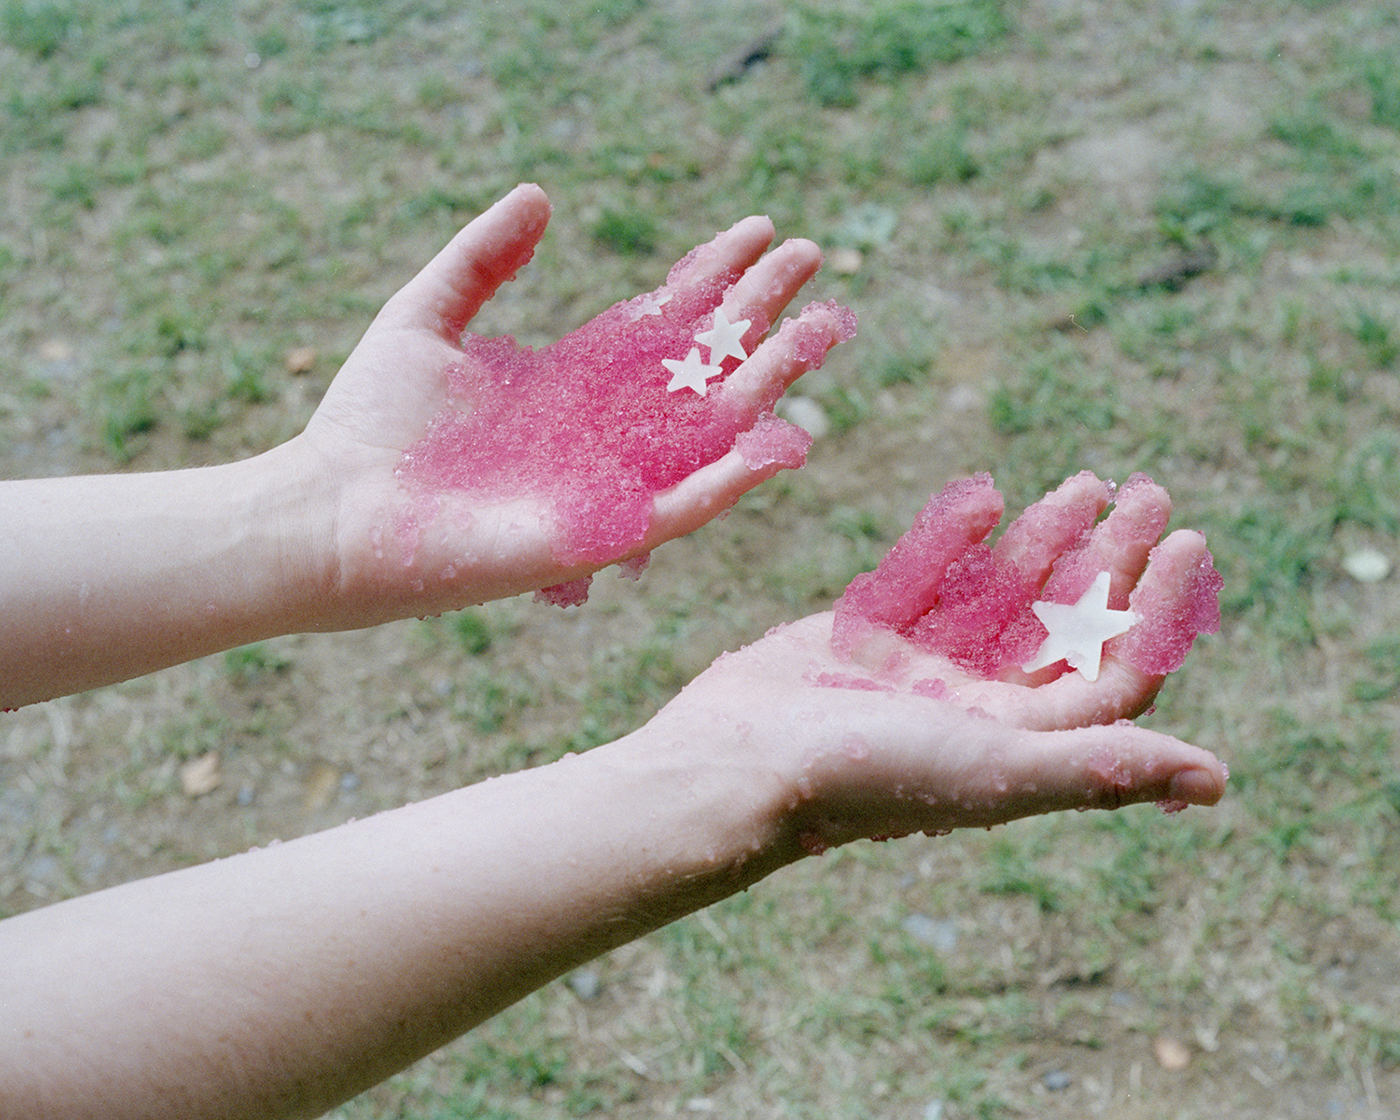 A photo of two hands holding a pink, glittery substance.